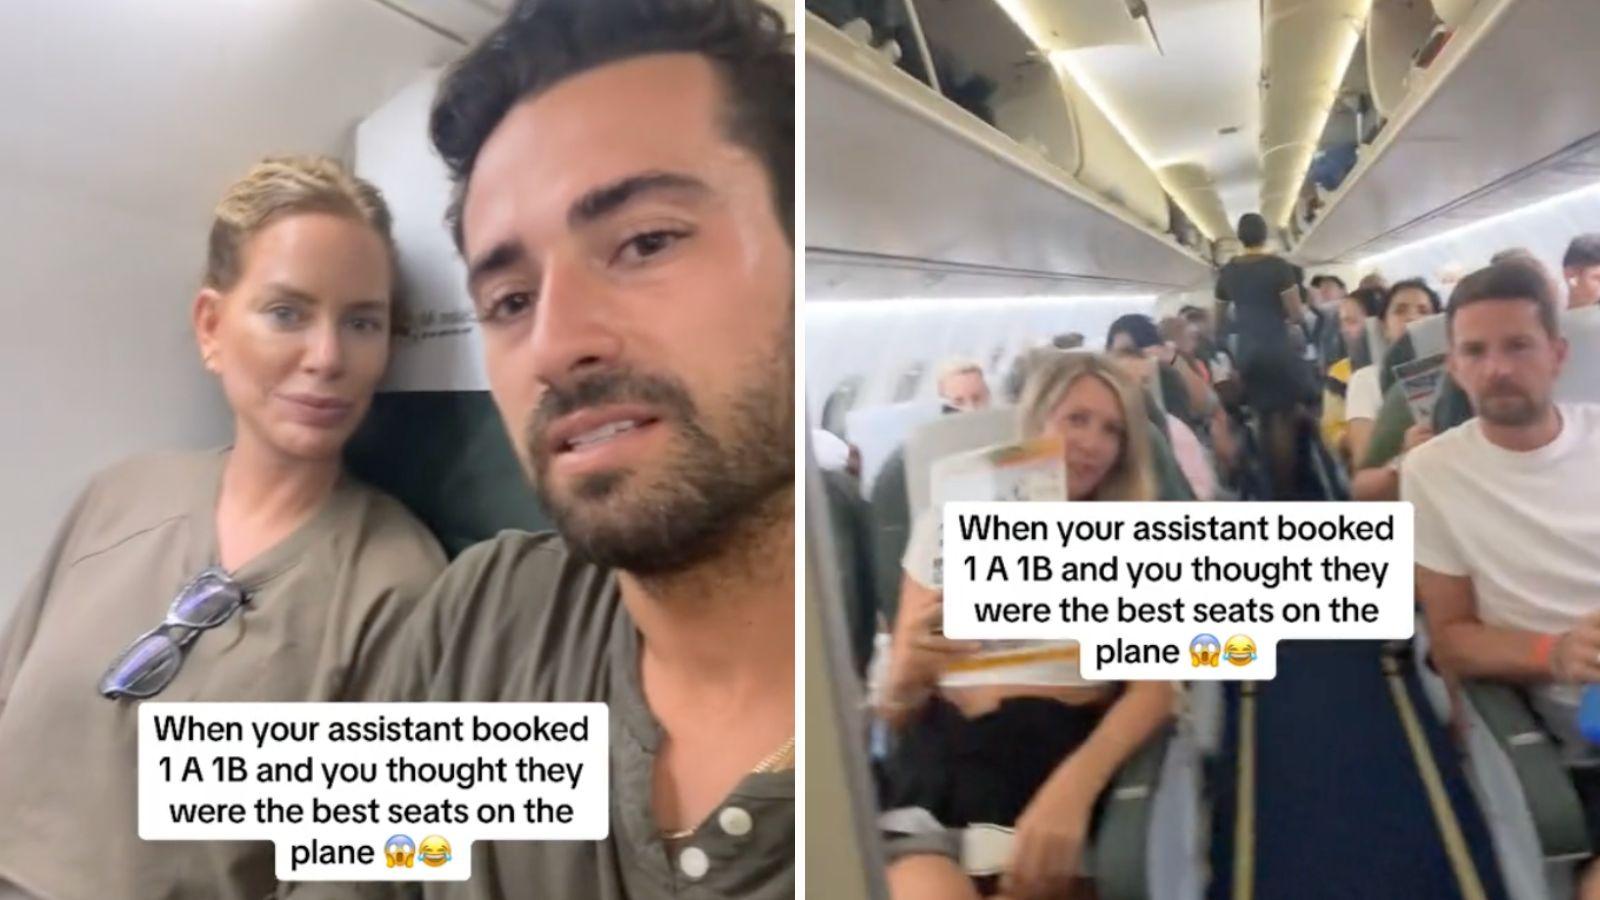 Couple stunned as they board plane after thinking they got the 'best seats'